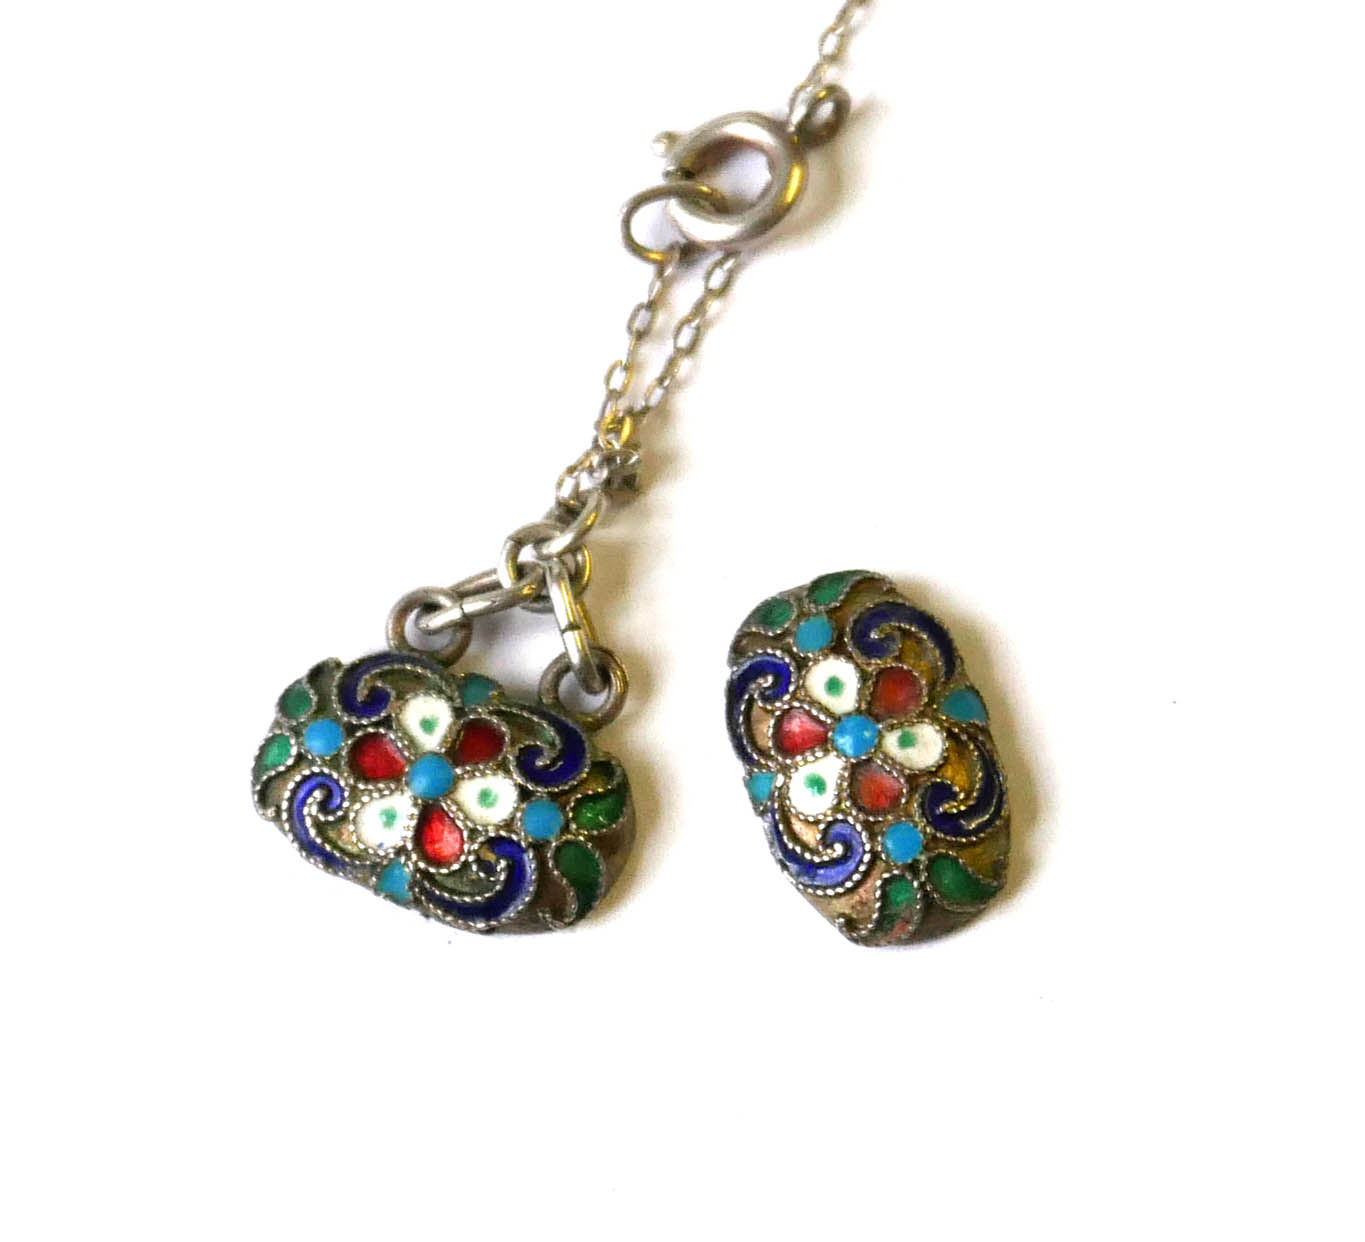 A STERLING SILVER AND ENAMEL RUSSIAN DESIGN PENDANT NECKLACE Oval links with scrolled enamel